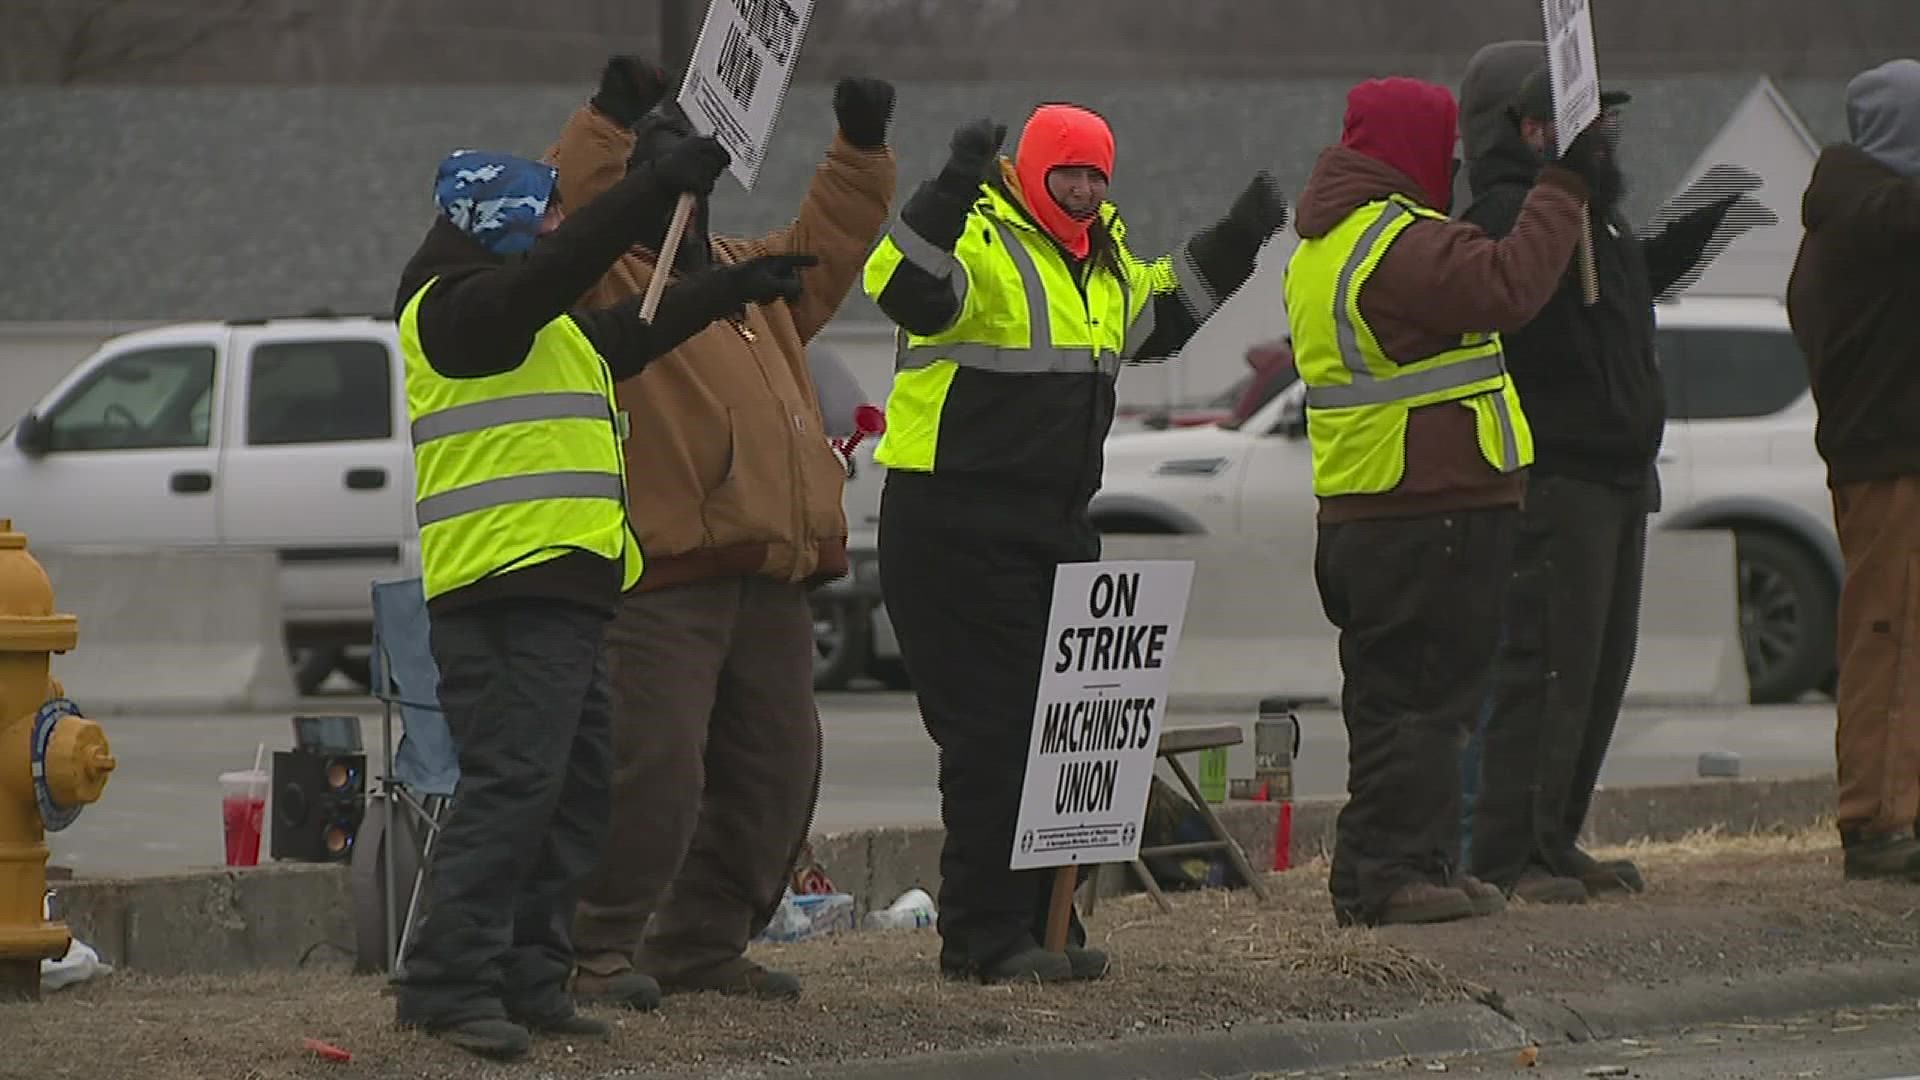 IAM Union members say a city ordinance prevents picketers from having fires, tents and port-a-potties. To help, some workers have been dancing the cold away.